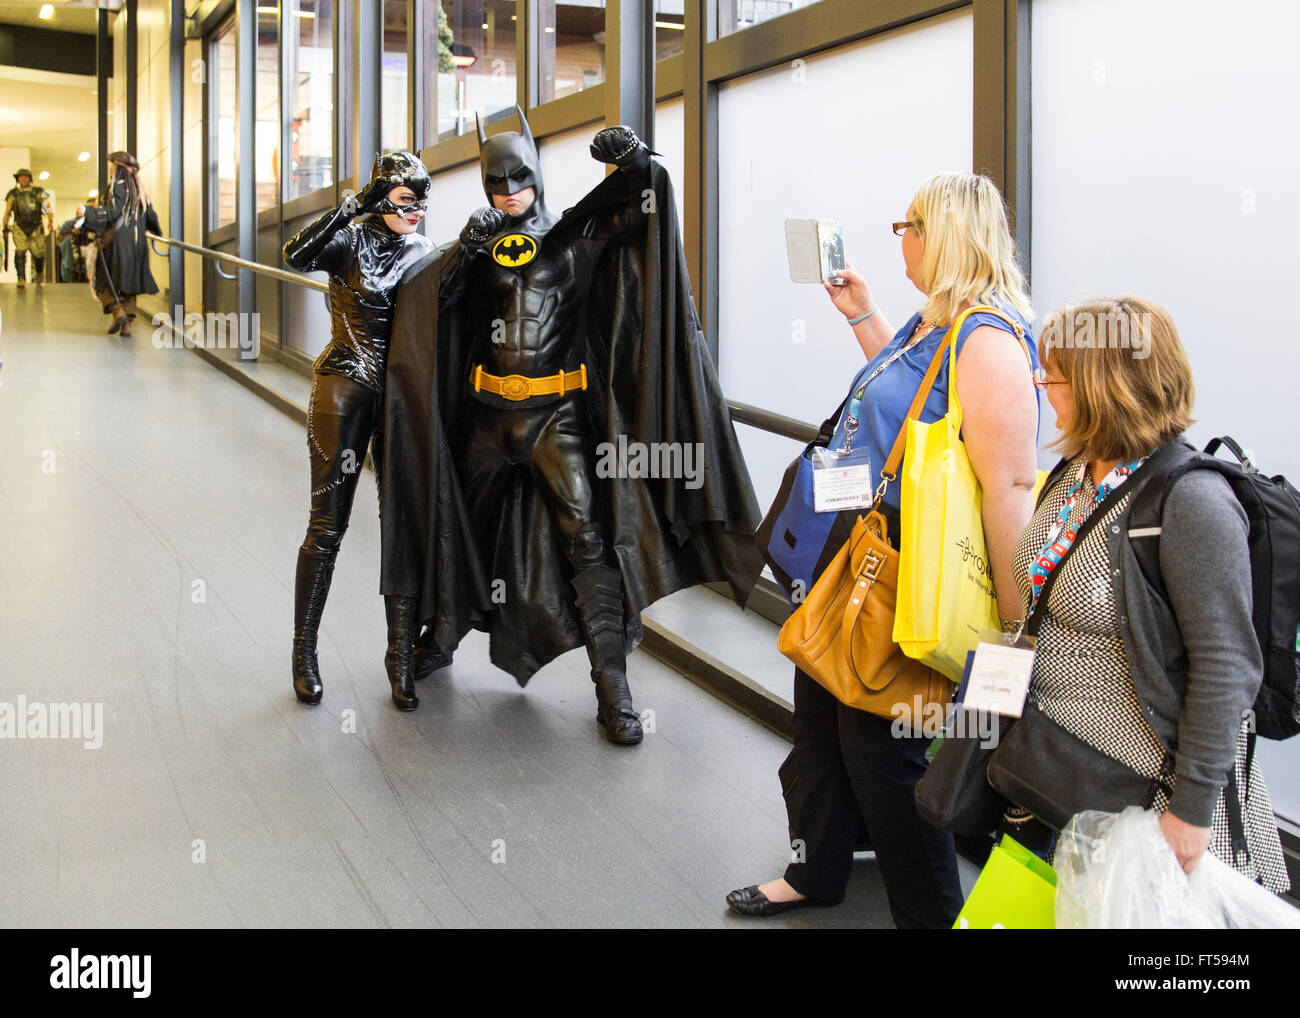 Batman and Catwoman posing for a woman to photograph them on her phone Stock Photo